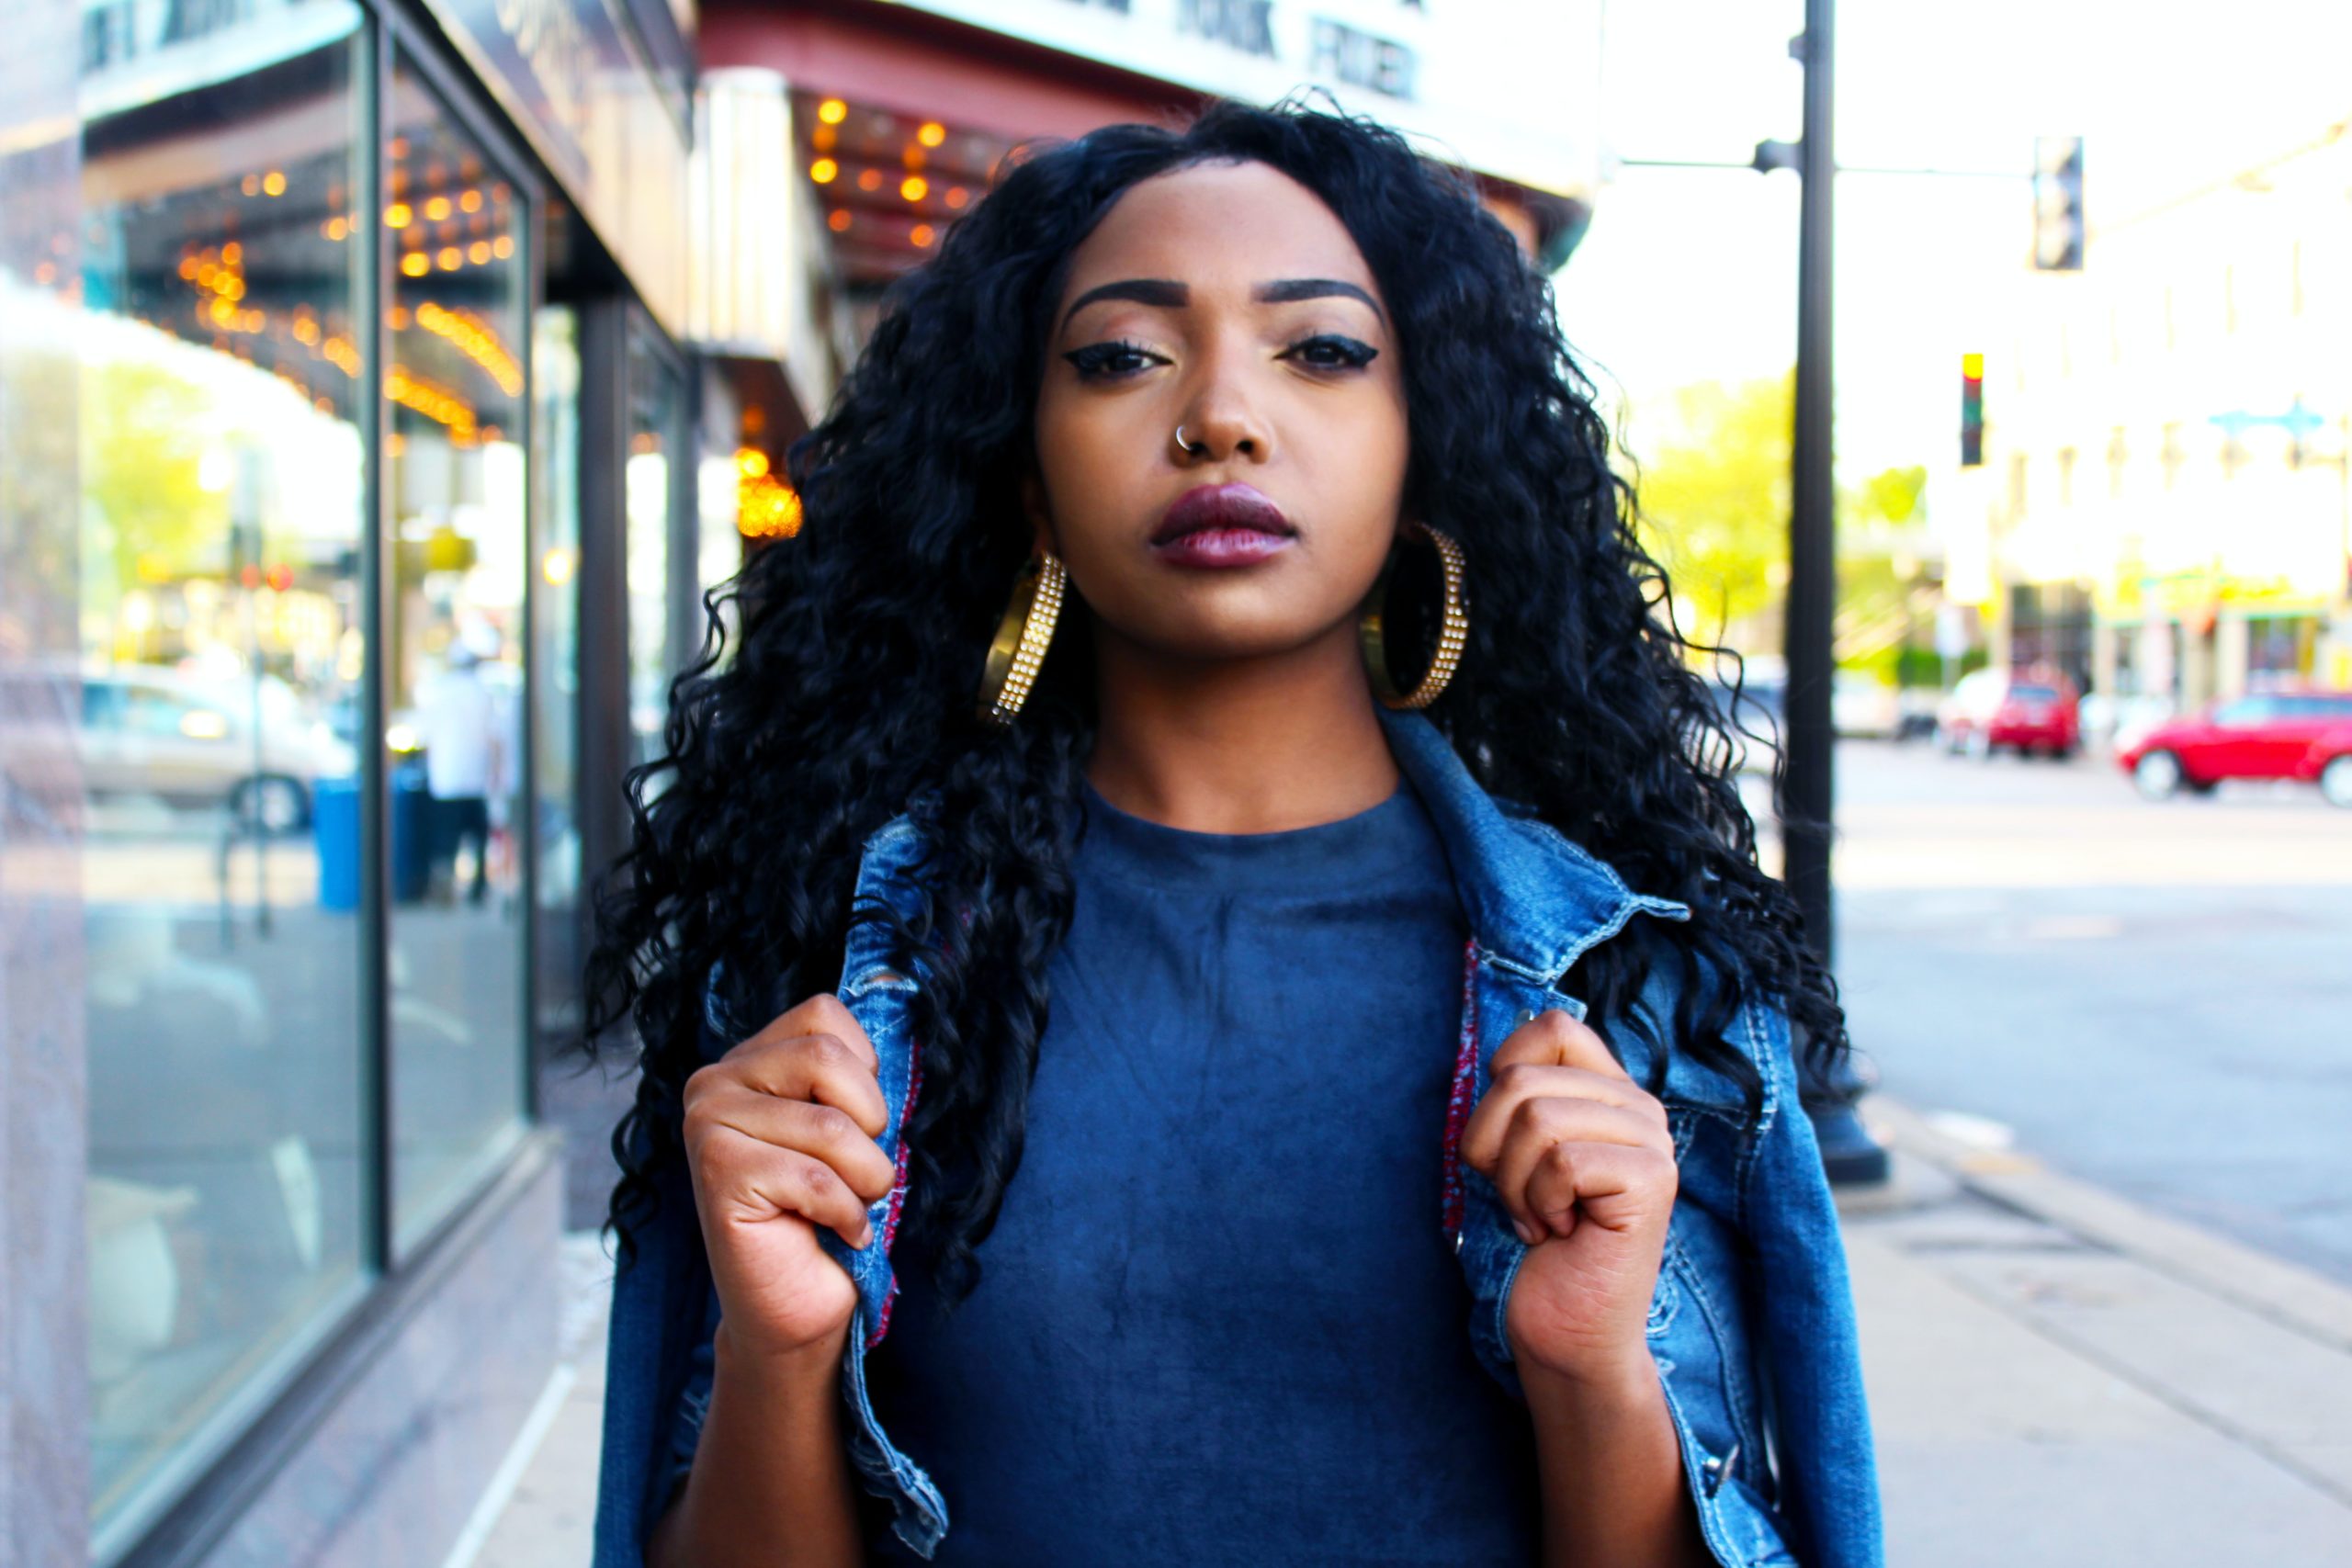 young black woman with long black curly hair wearing make-up gold earrings with both hands holding the collar of her blue denim jacket walking passed a glass window with sidewalk and street in the background